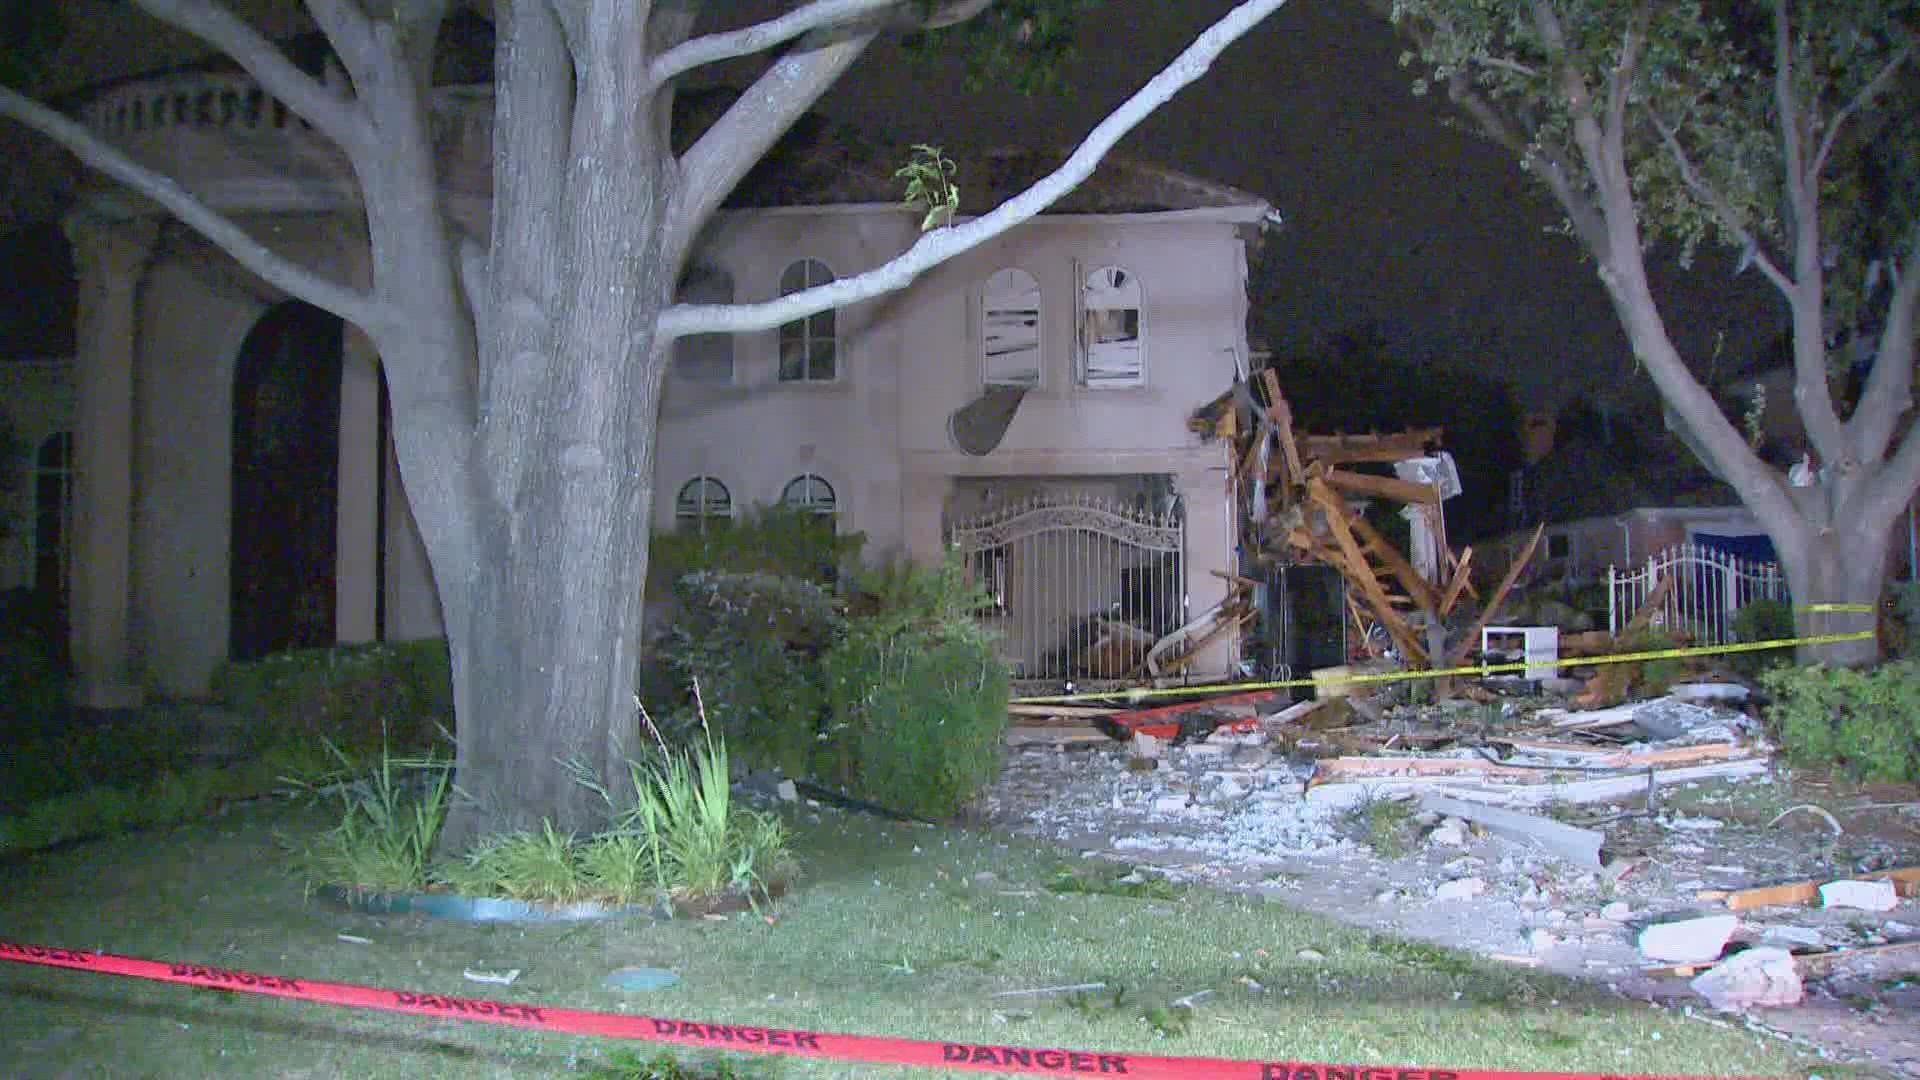 Investigators are still looking to determine the cause of the explosion. This comes about a year after another house explosion in Plano that came from a gas leak.